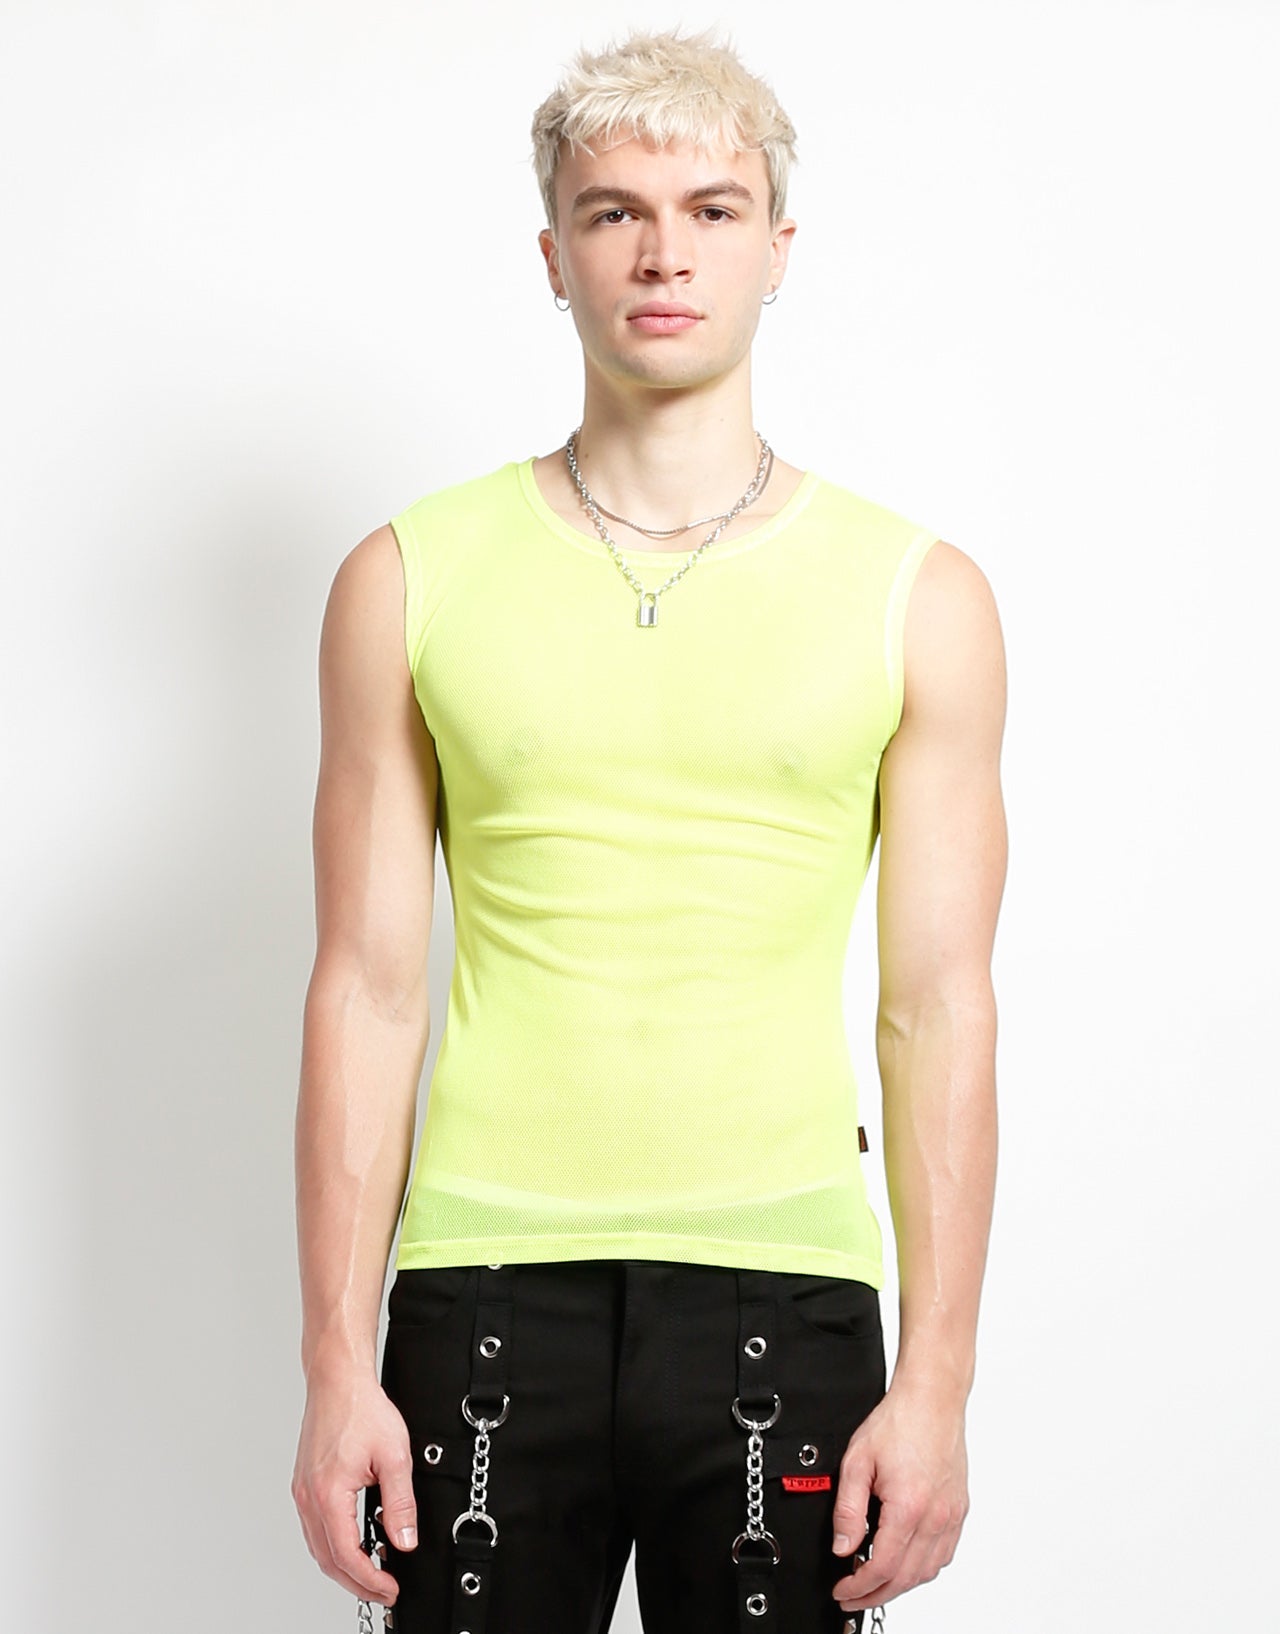 The yellow Sleeveless Fishnet Muscle Tank on a model wearing black pants, front view.